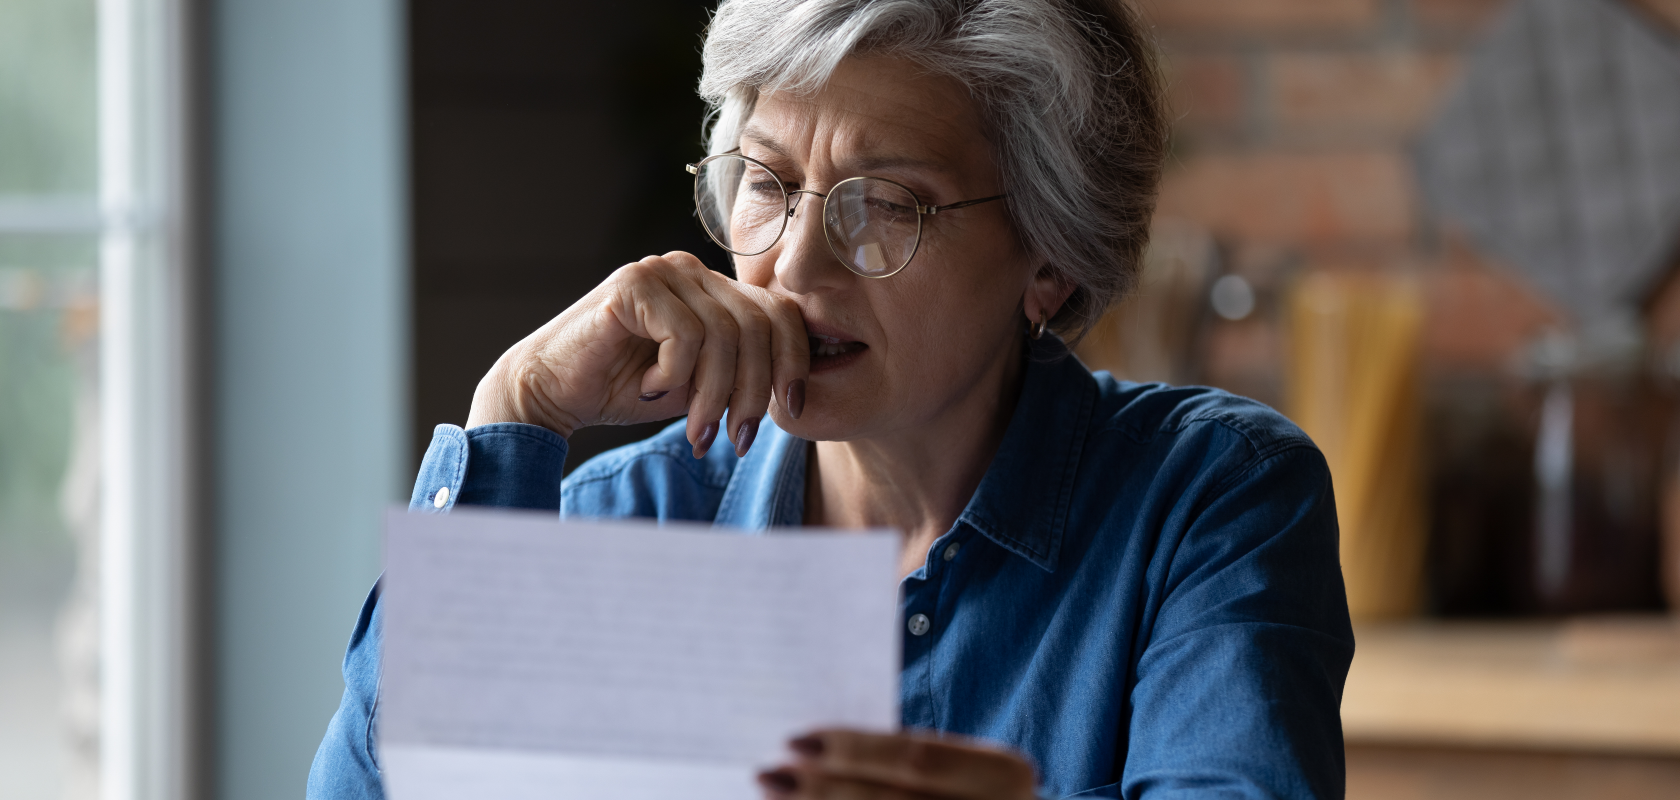 Senior woman reading Medicaid rules for selling home in Ohio, contemplating real estate decisions